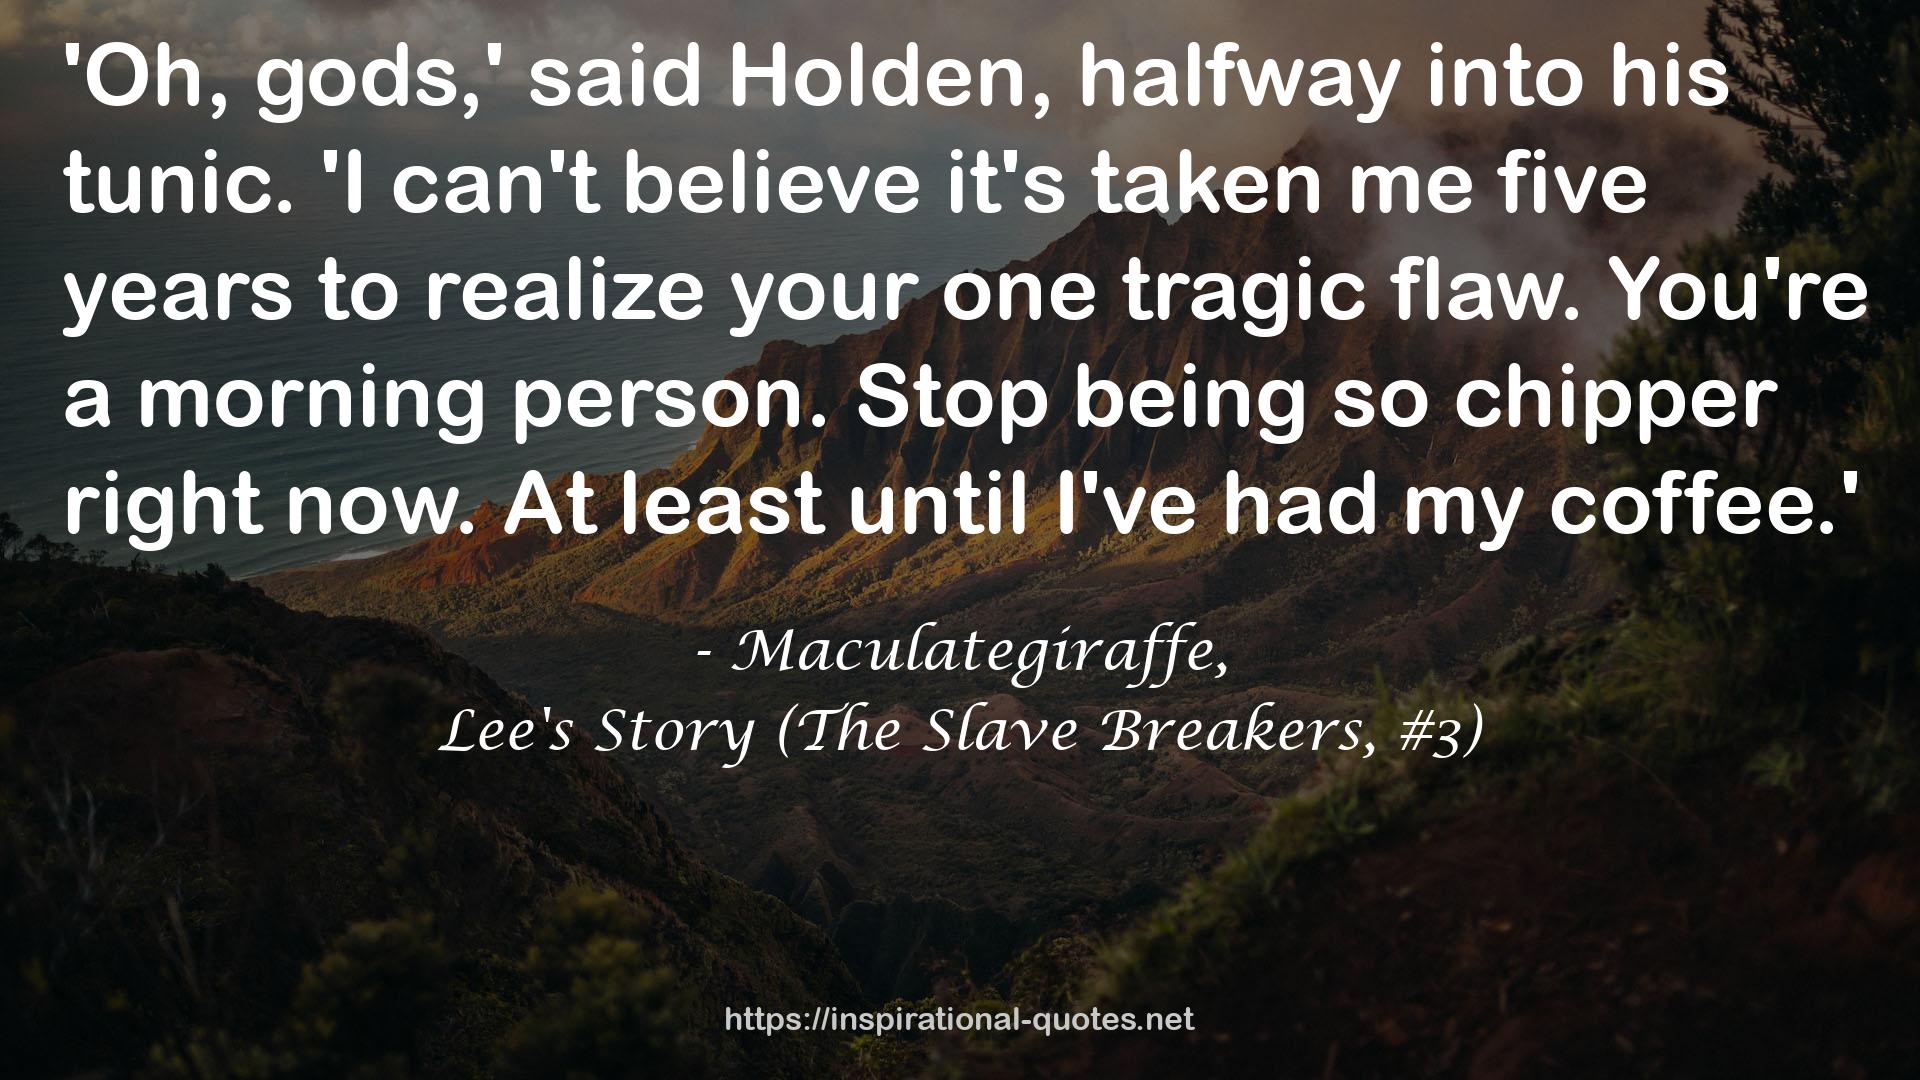 Lee's Story (The Slave Breakers, #3) QUOTES